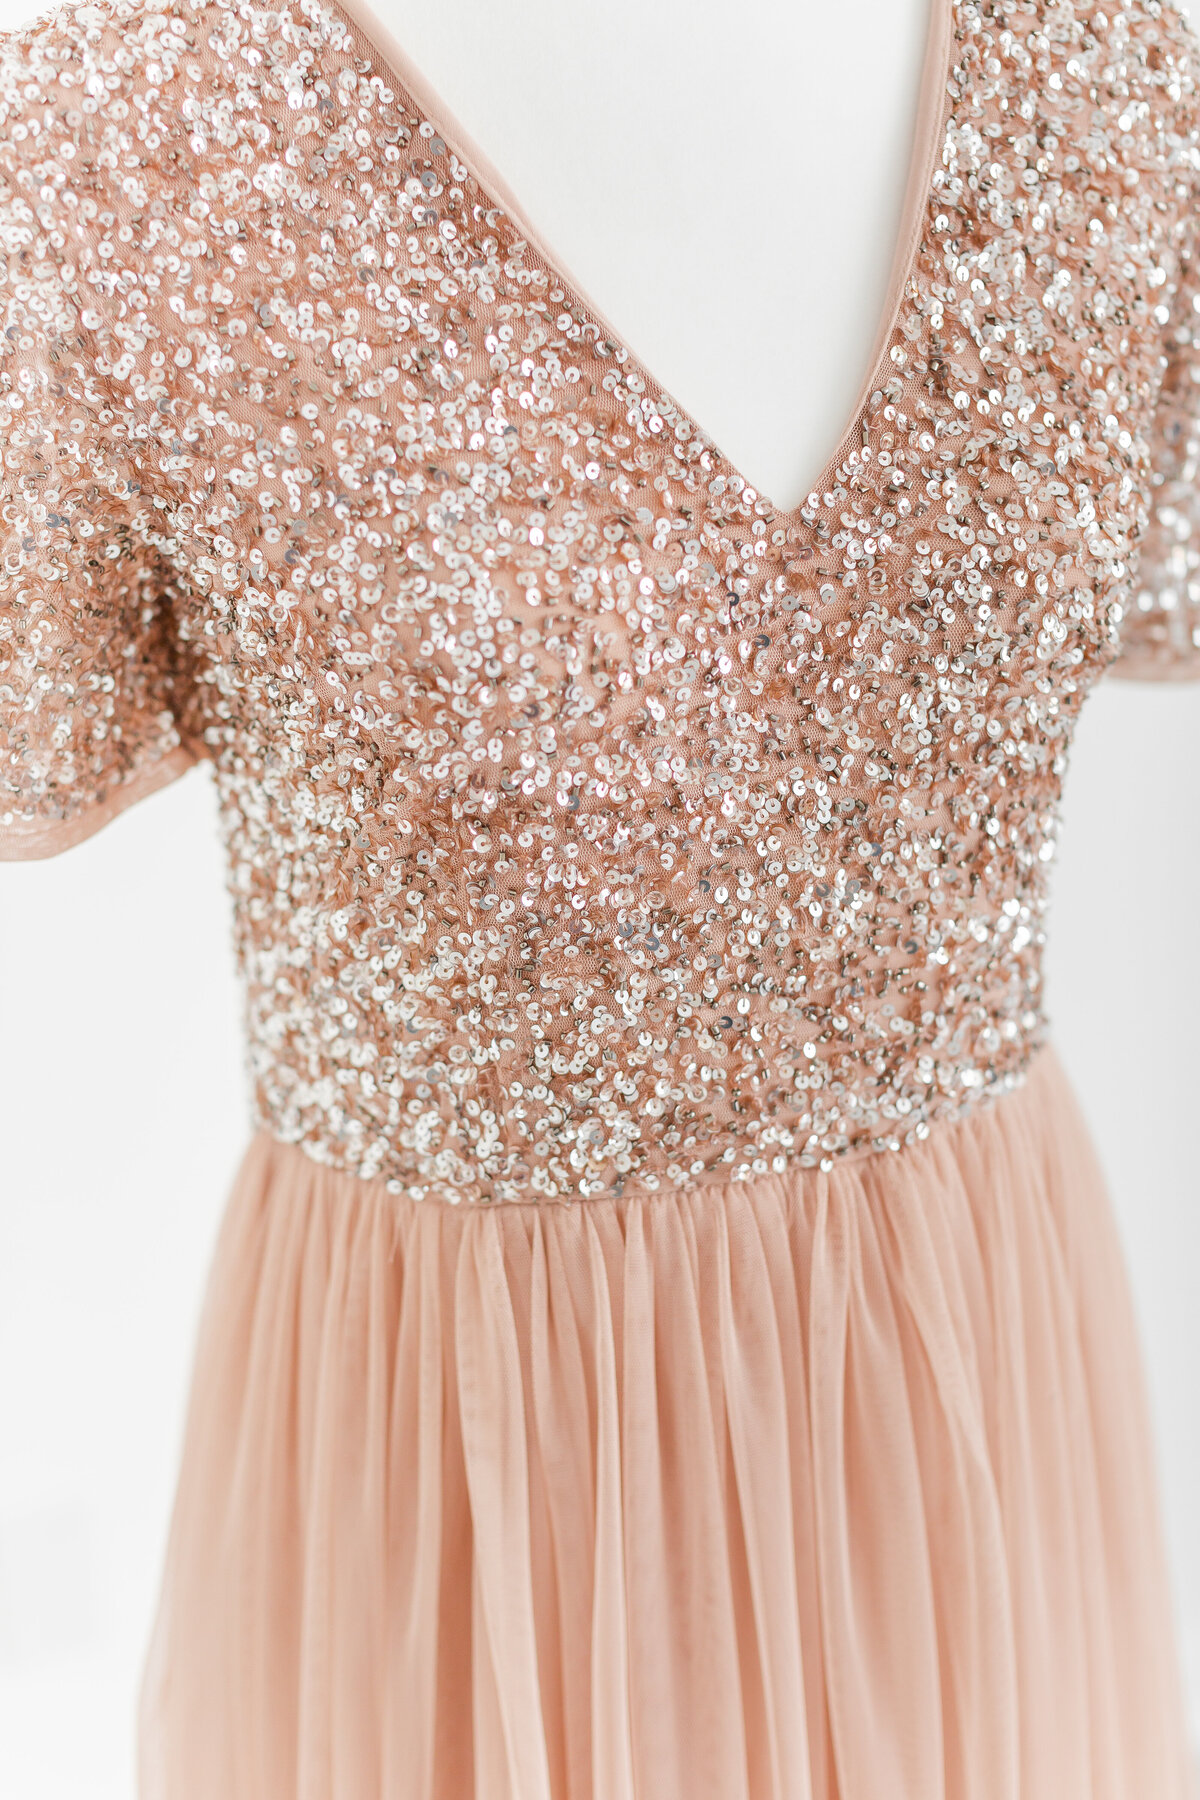 A closeup photo of a pink tulle dress with a sequin bodice for your Nova Studio Photography session